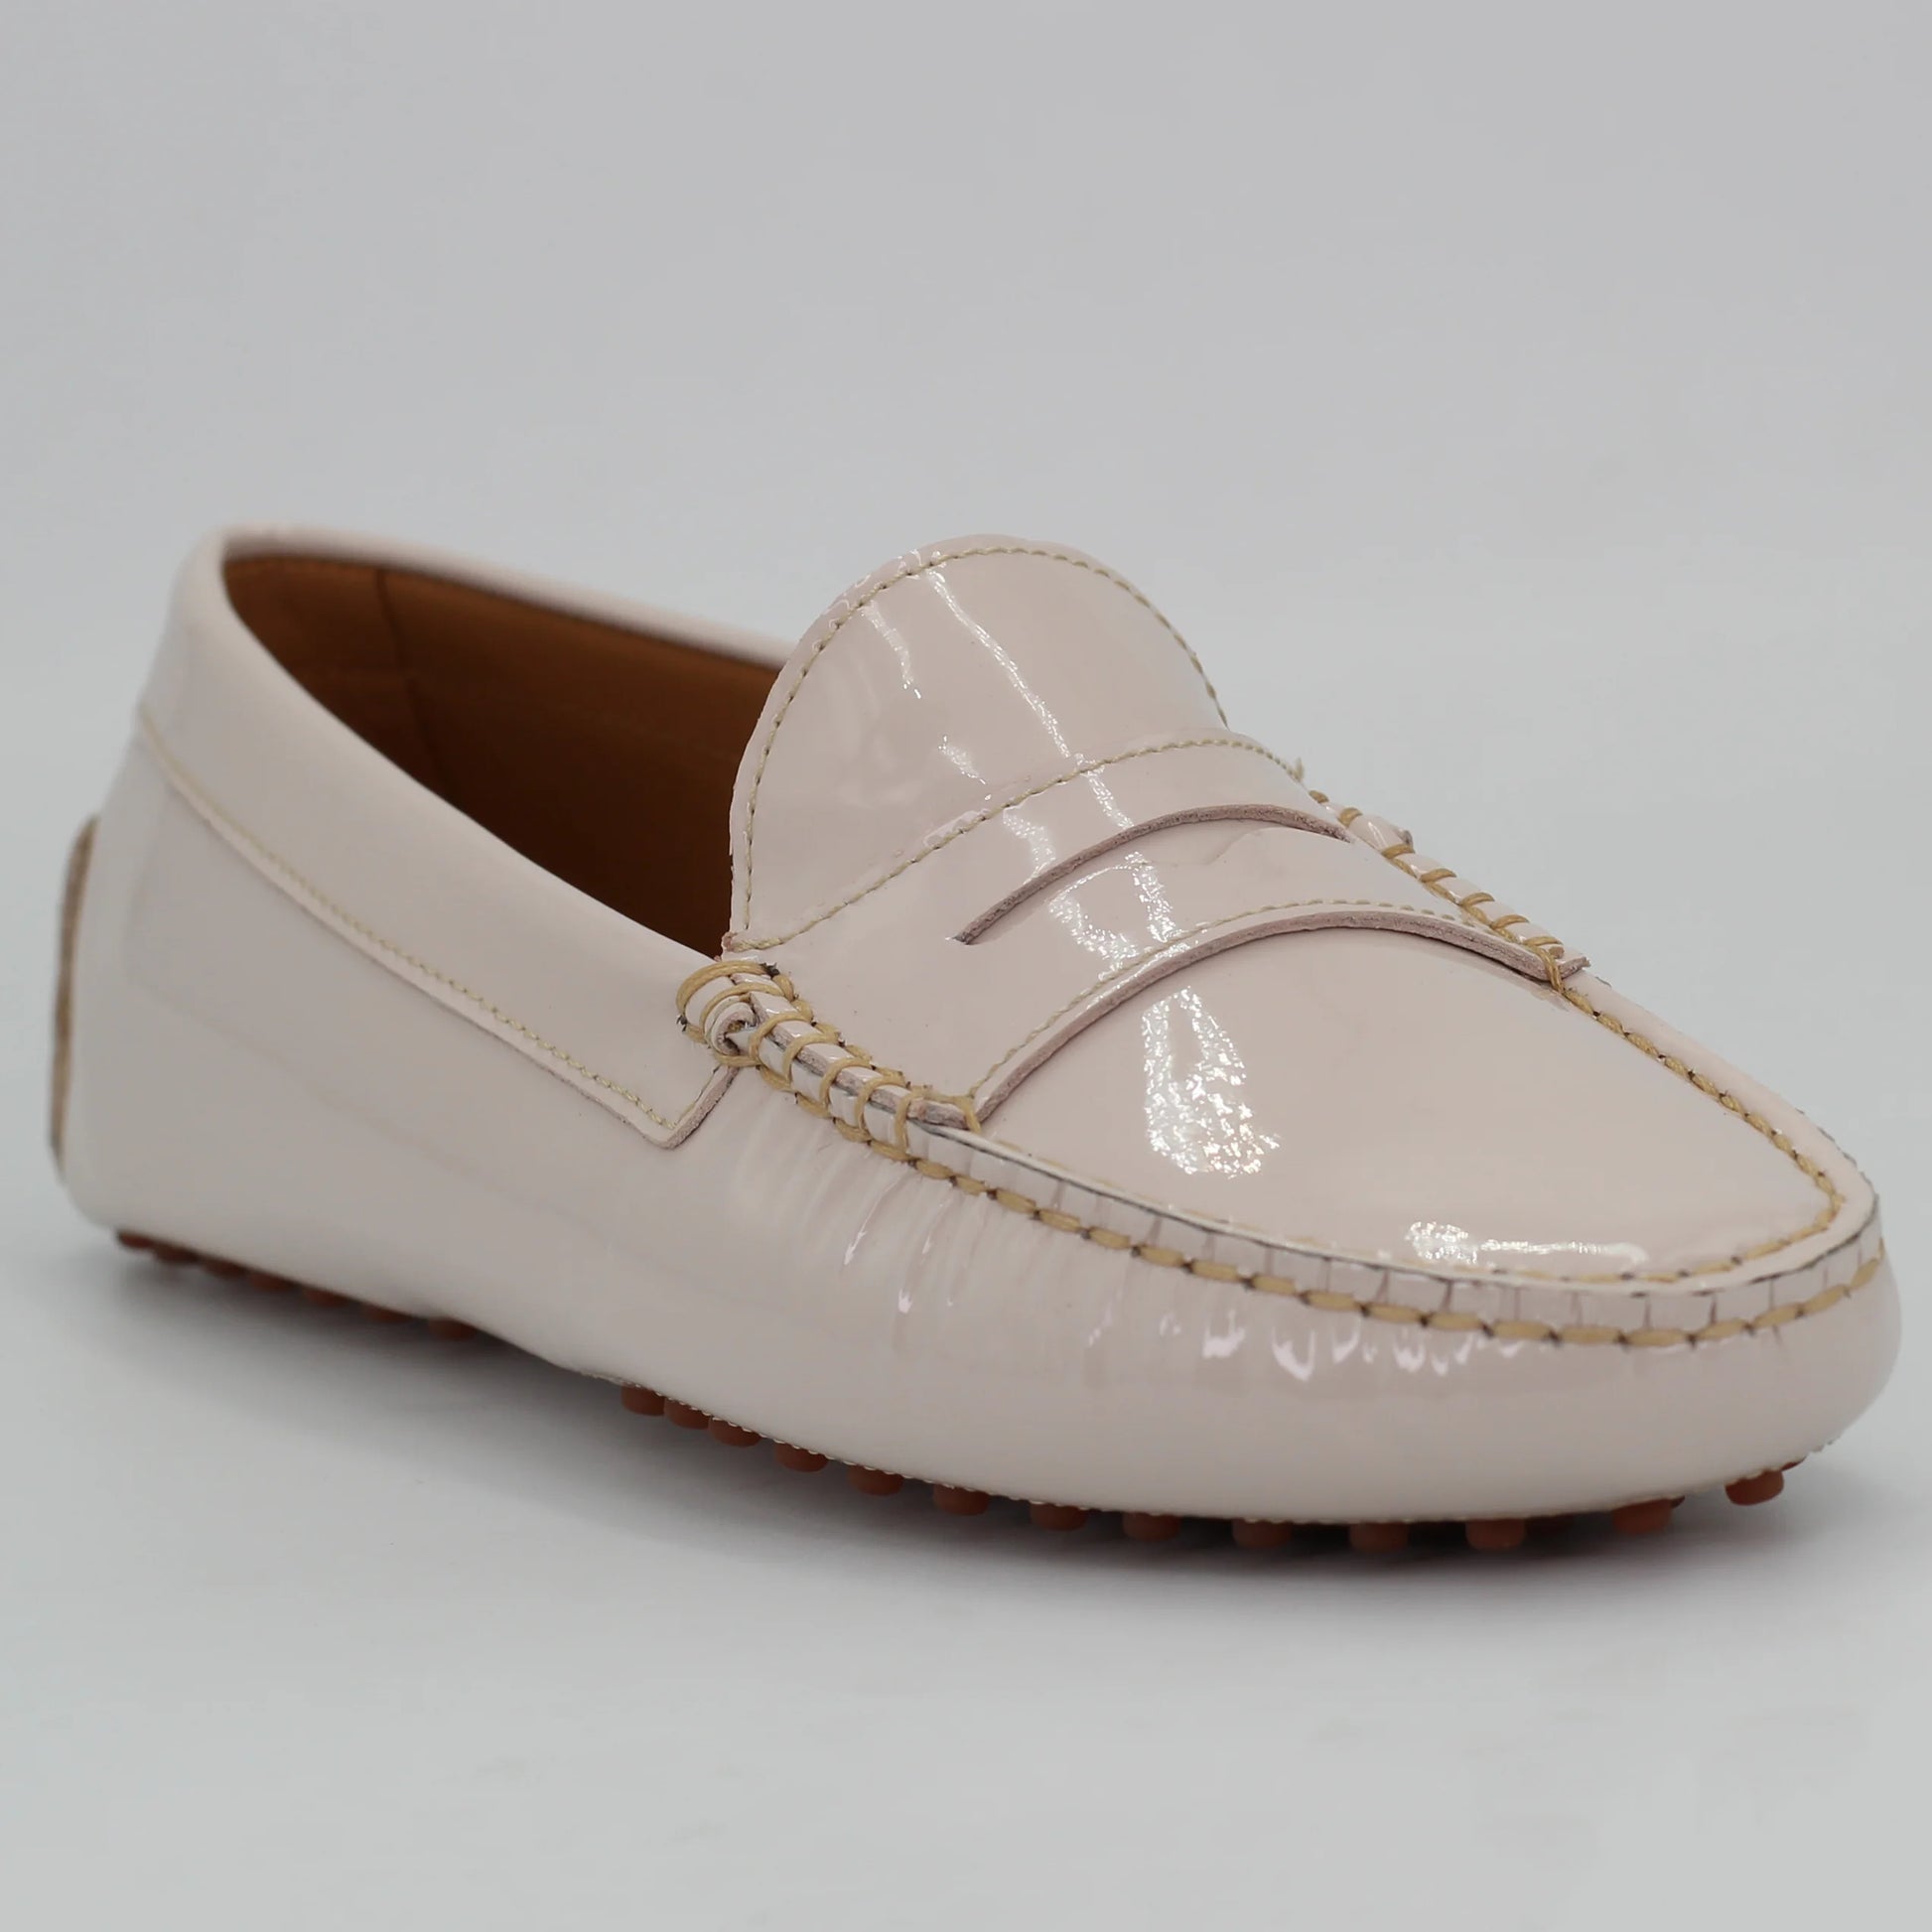 Shop Handmade Italian Leather moccasin in nude (COND0402) or browse our range of hand-made Italian shoes in leather or suede in-store at Aliverti Cape Town, or shop online. We deliver in South Africa & offer multiple payment plans as well as accept multiple safe & secure payment methods.